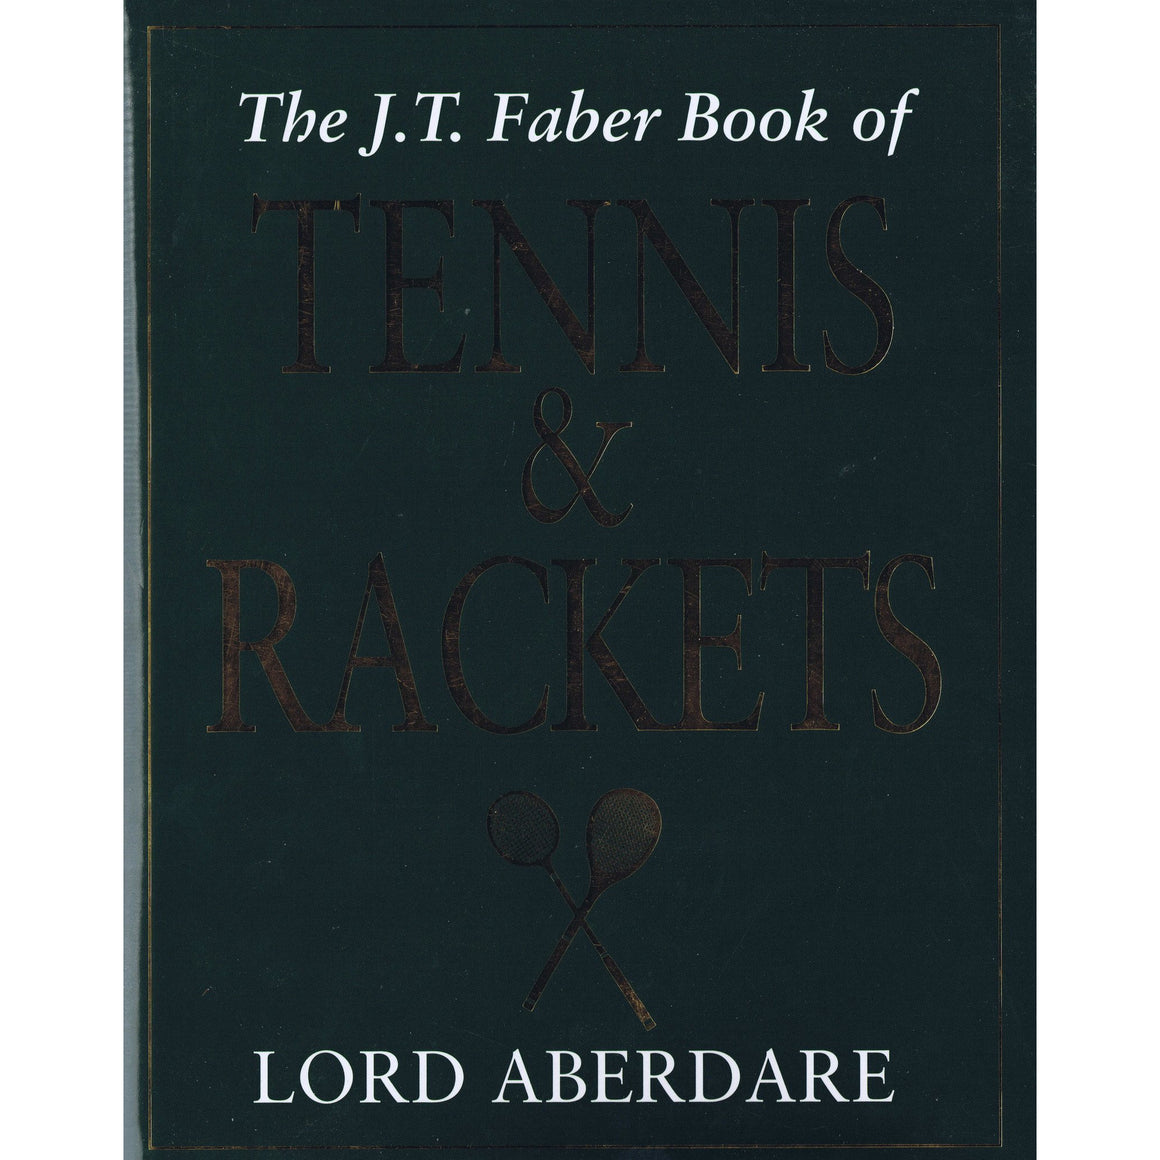 The J.T. Faber Book of Tennis & Rackets